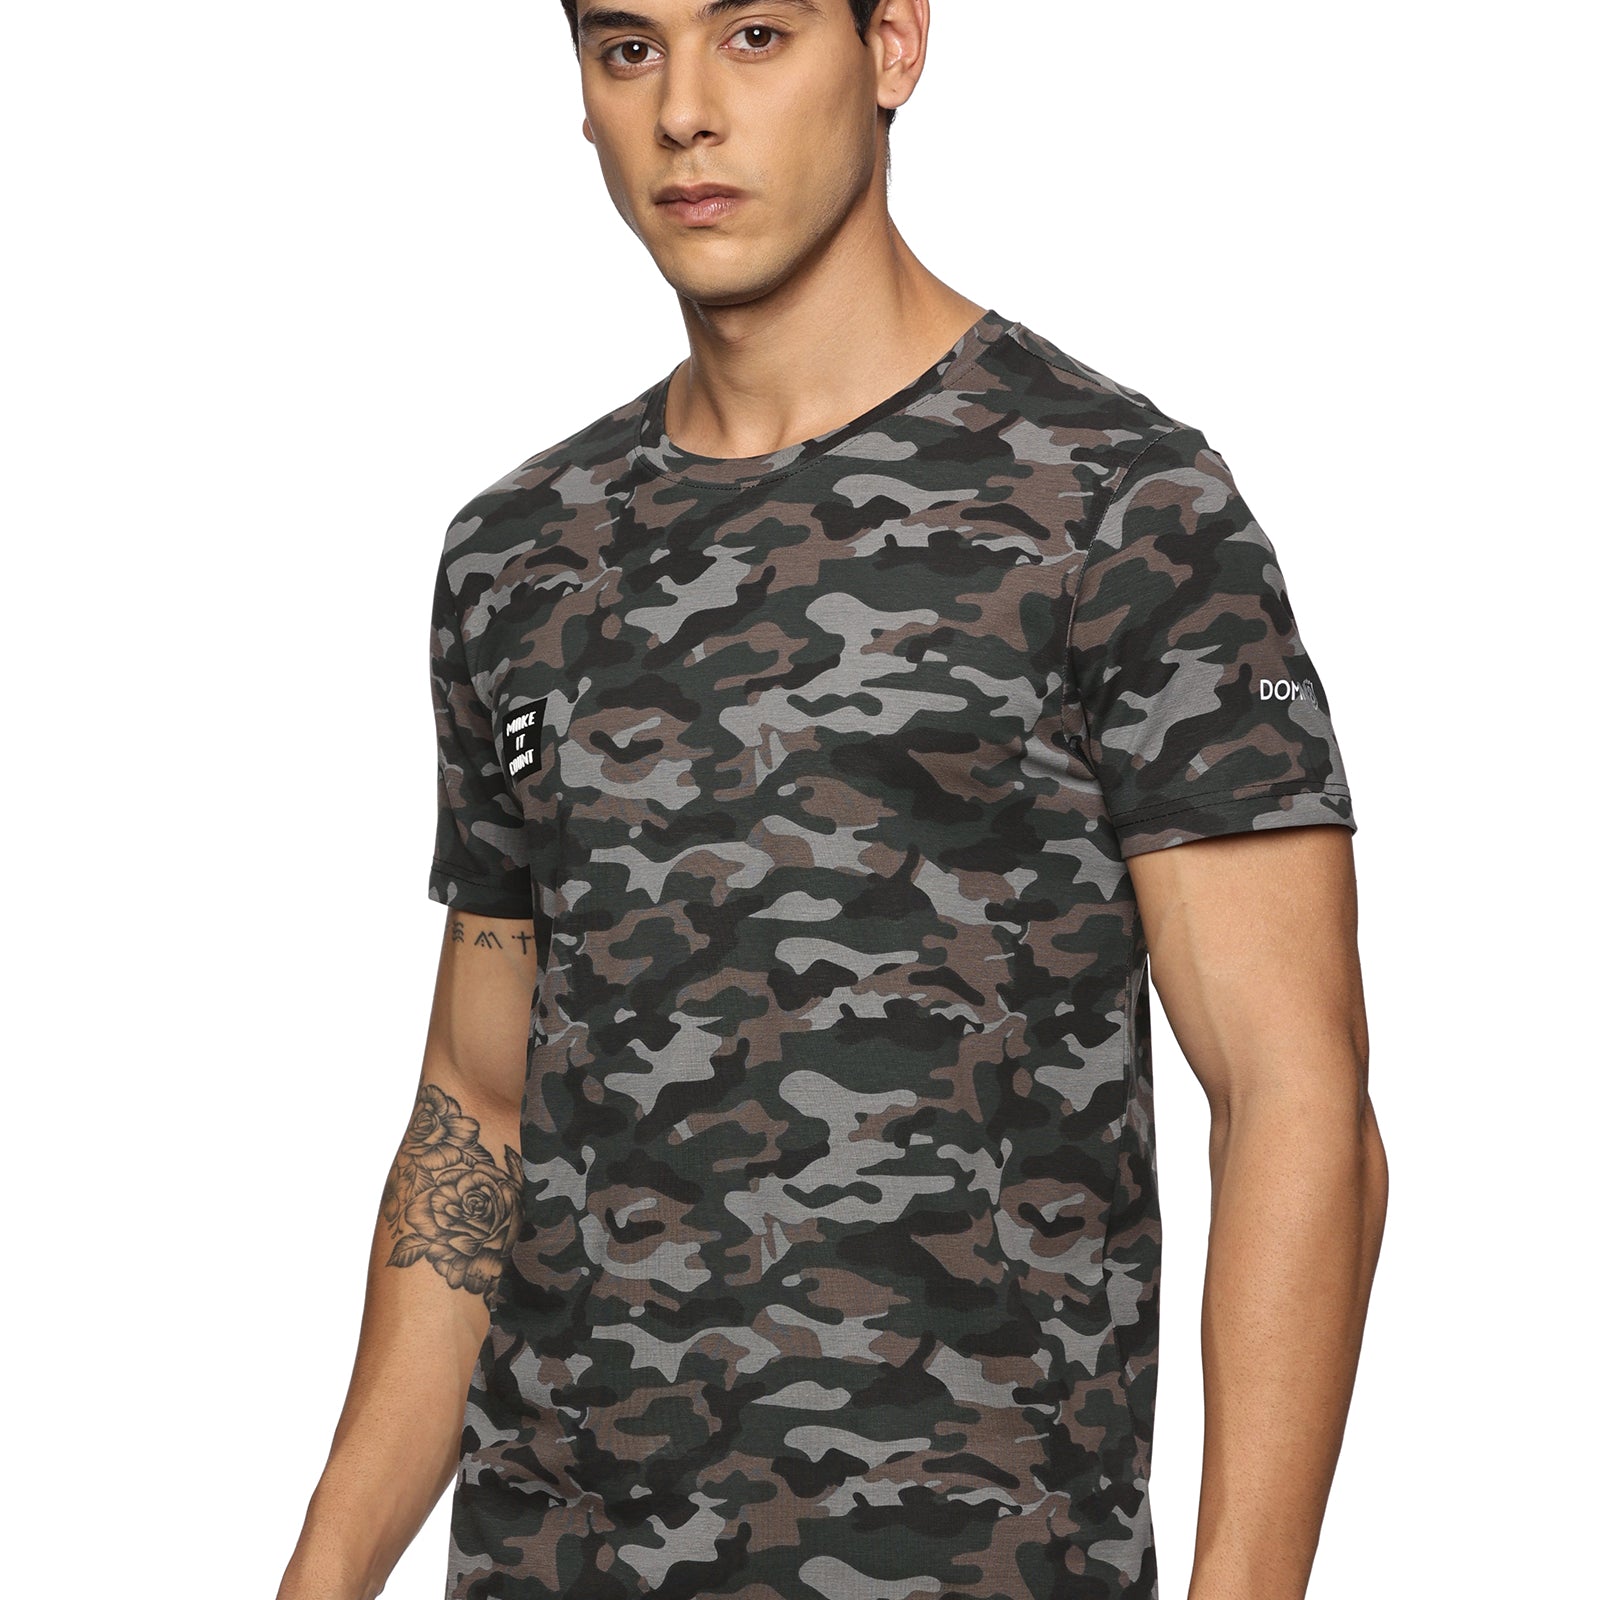 Men's Camouflage Outdoor T-Shirt for Running/Training/ Gym workout/sports